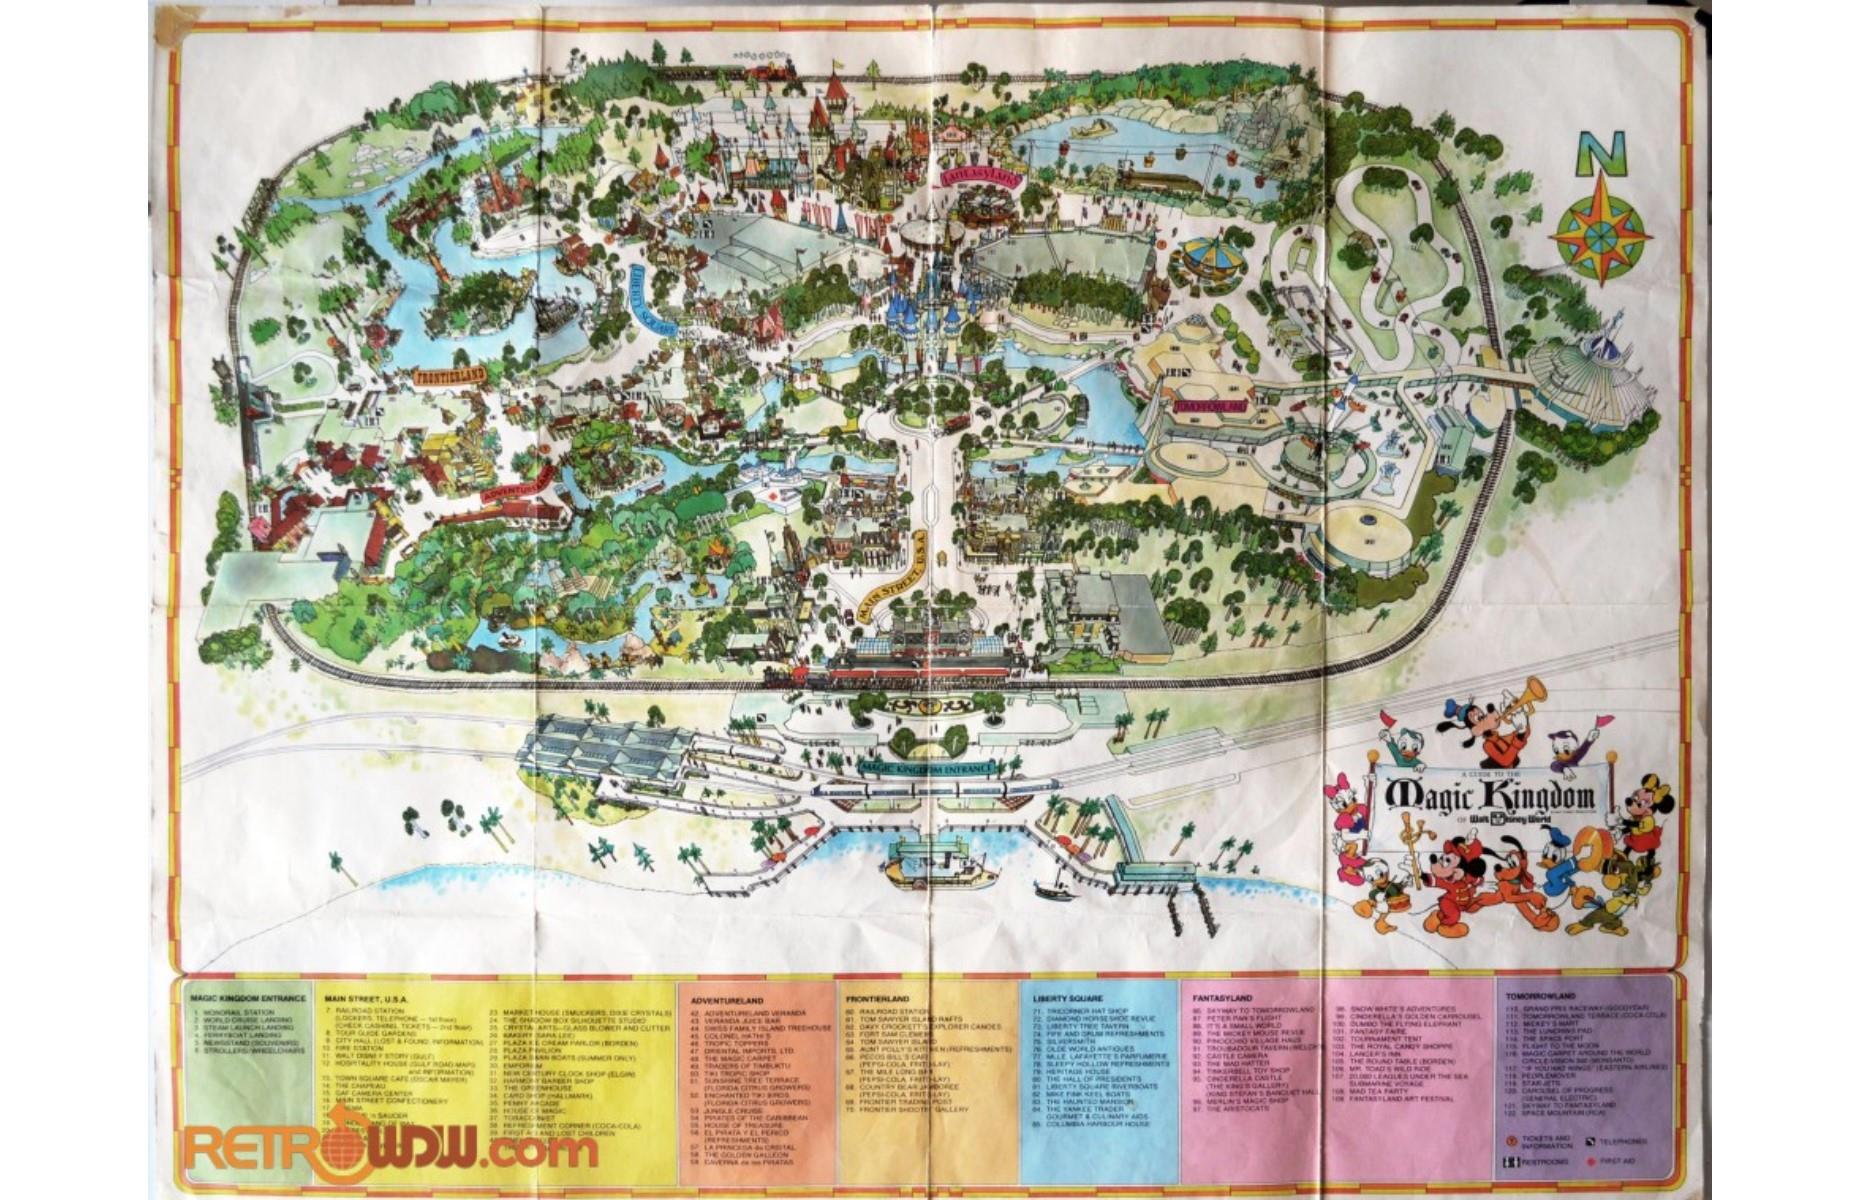 Disney park maps from the 1970s: $210 (£163)